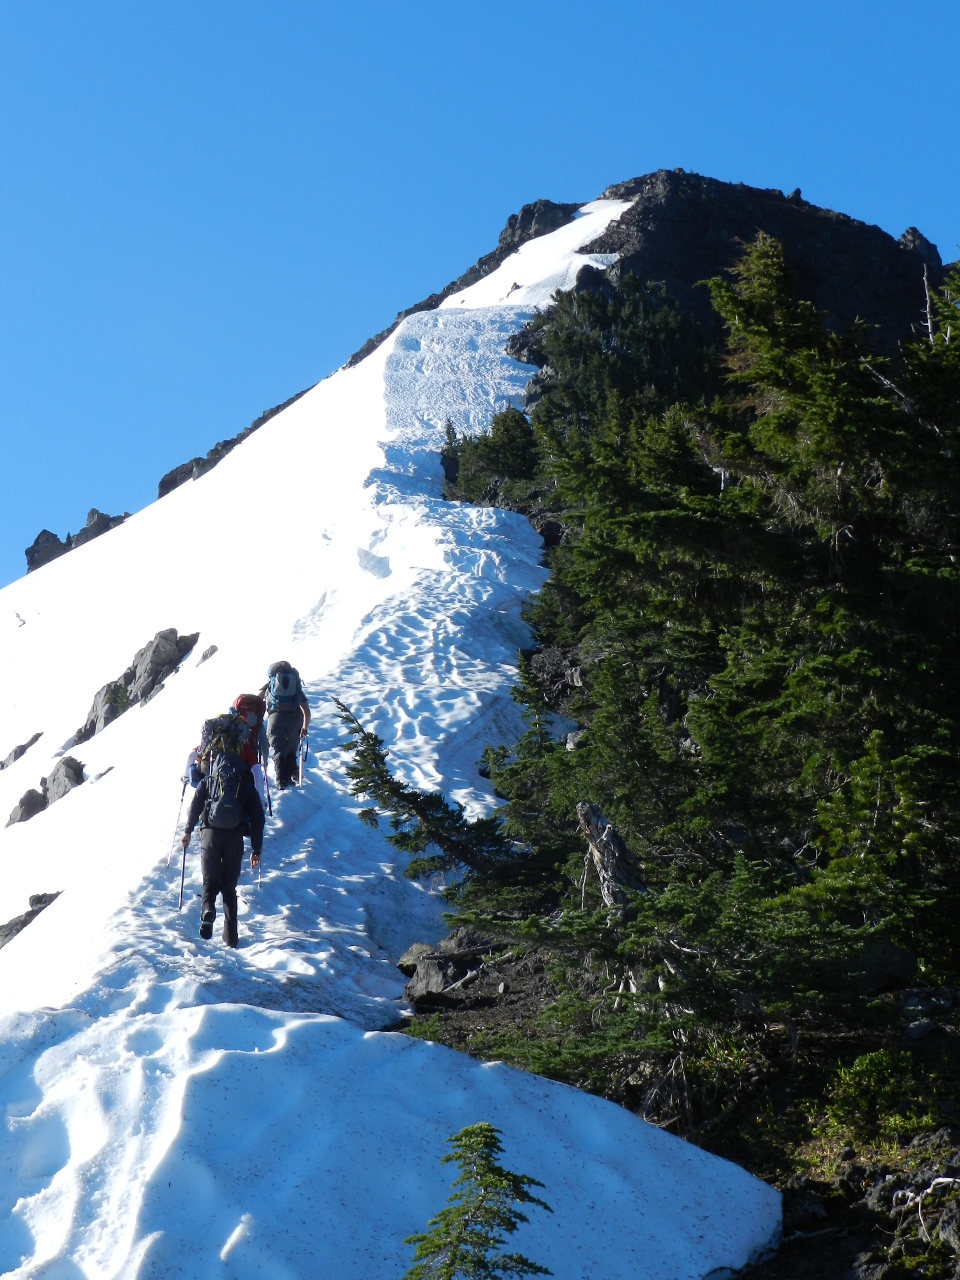 Hiking up the snow on the north ridge